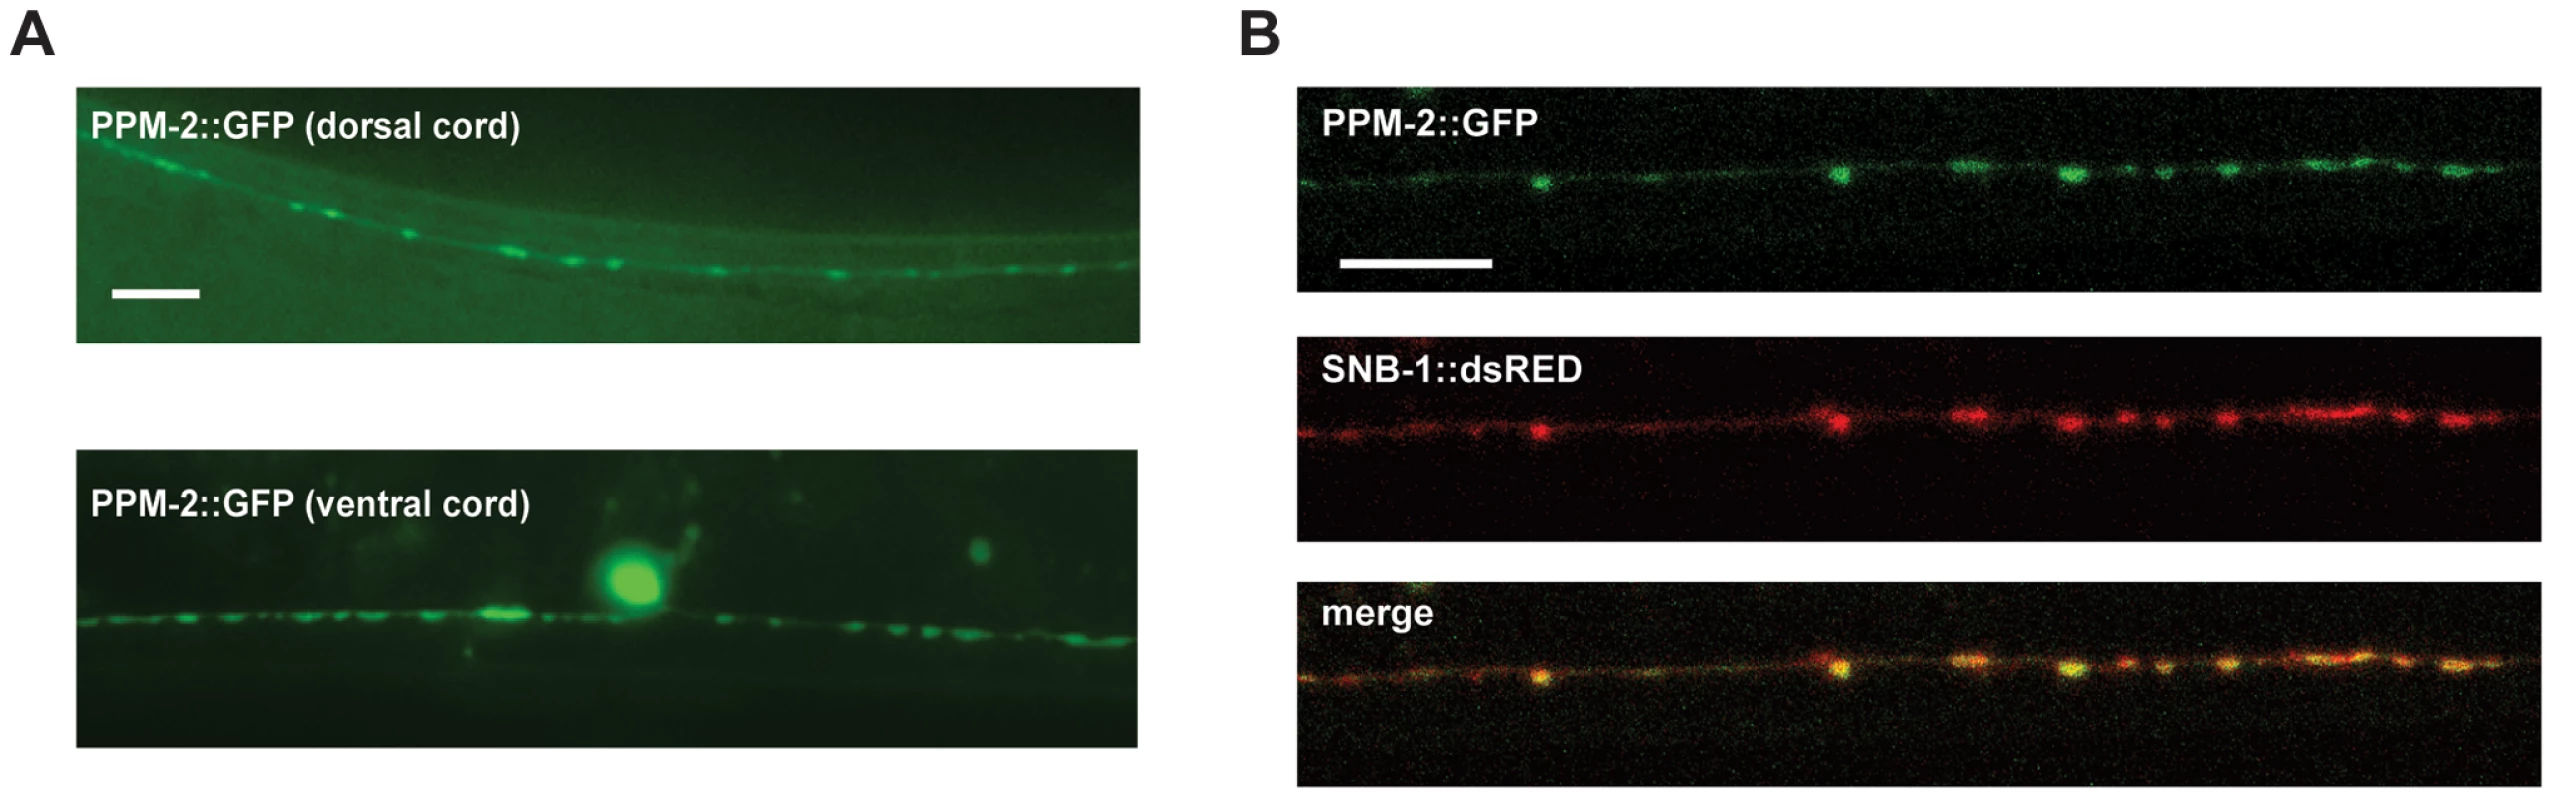 PPM-2 localizes to the presynaptic terminal.